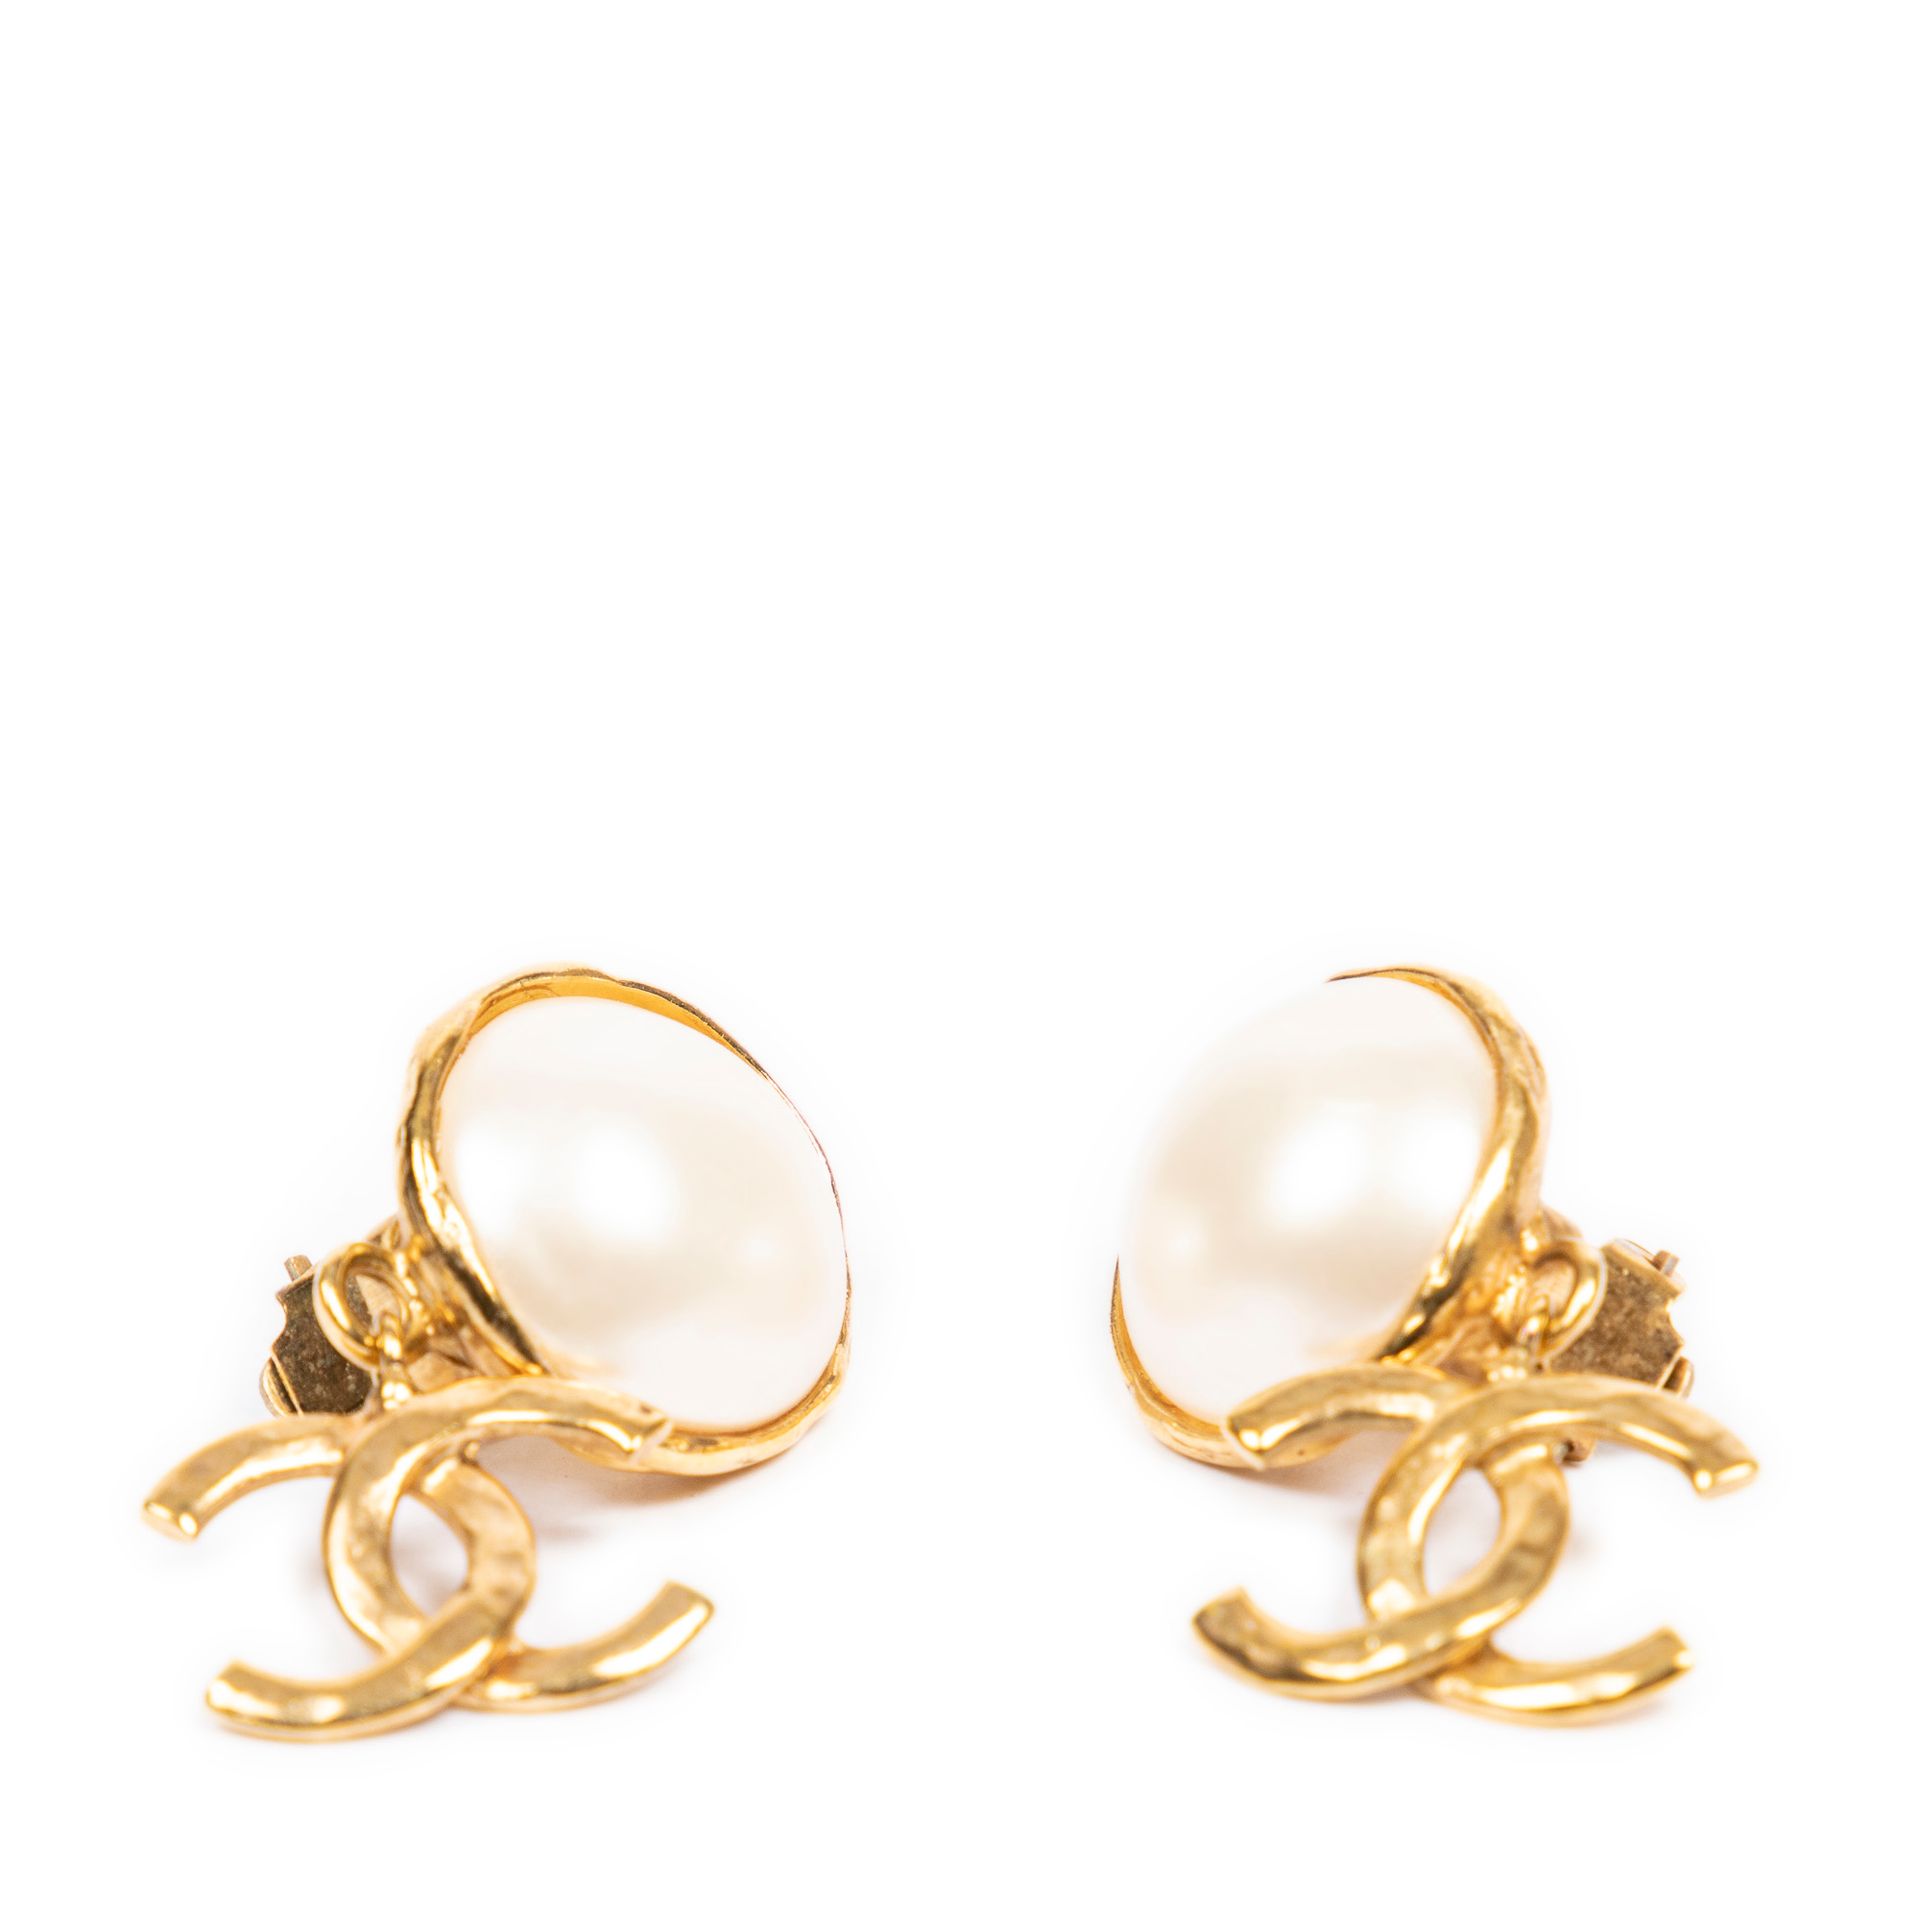 Chanel CHANEL - Pair of ear clips in gold-plated metal, each clip adorned with a&hellip;